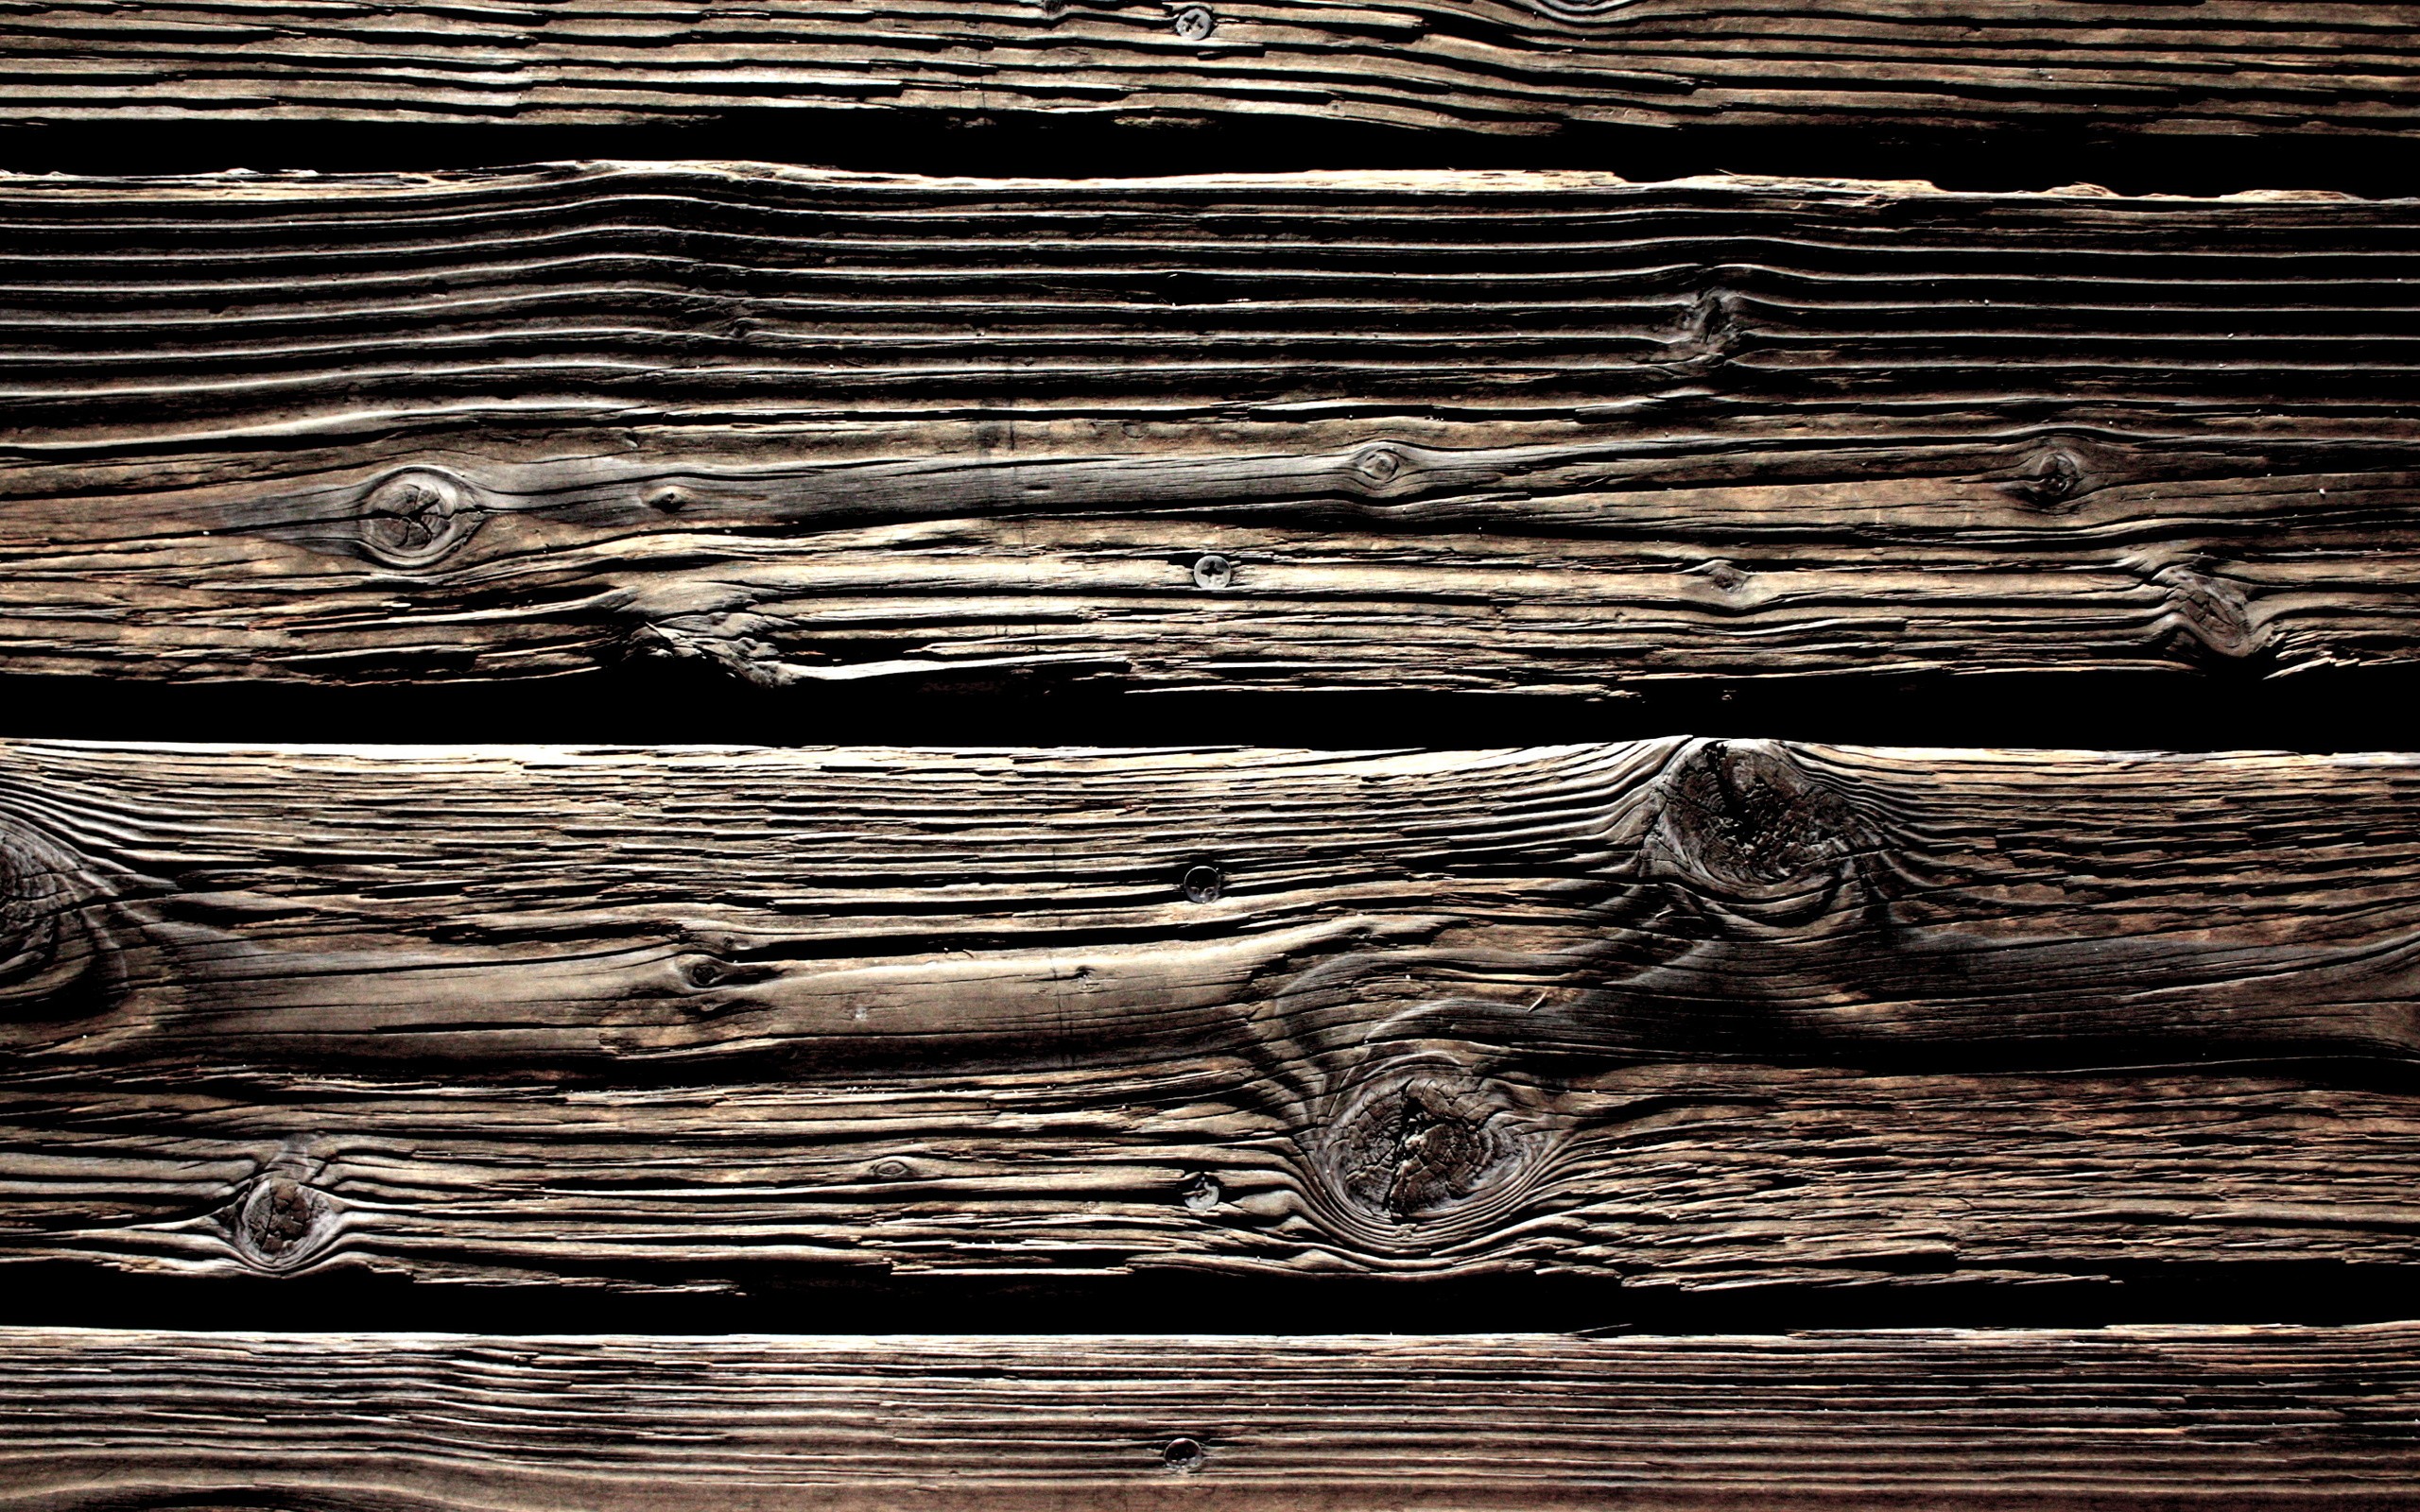 U Interesting Reclaimed Wood Planks Bay Area Old Barn Wood Planks Installing Old Barn Wood Planks On A Wall Old Wood Floor Planks For Attic Old Wood Planks Old Wood Plank Wallpaper Old W